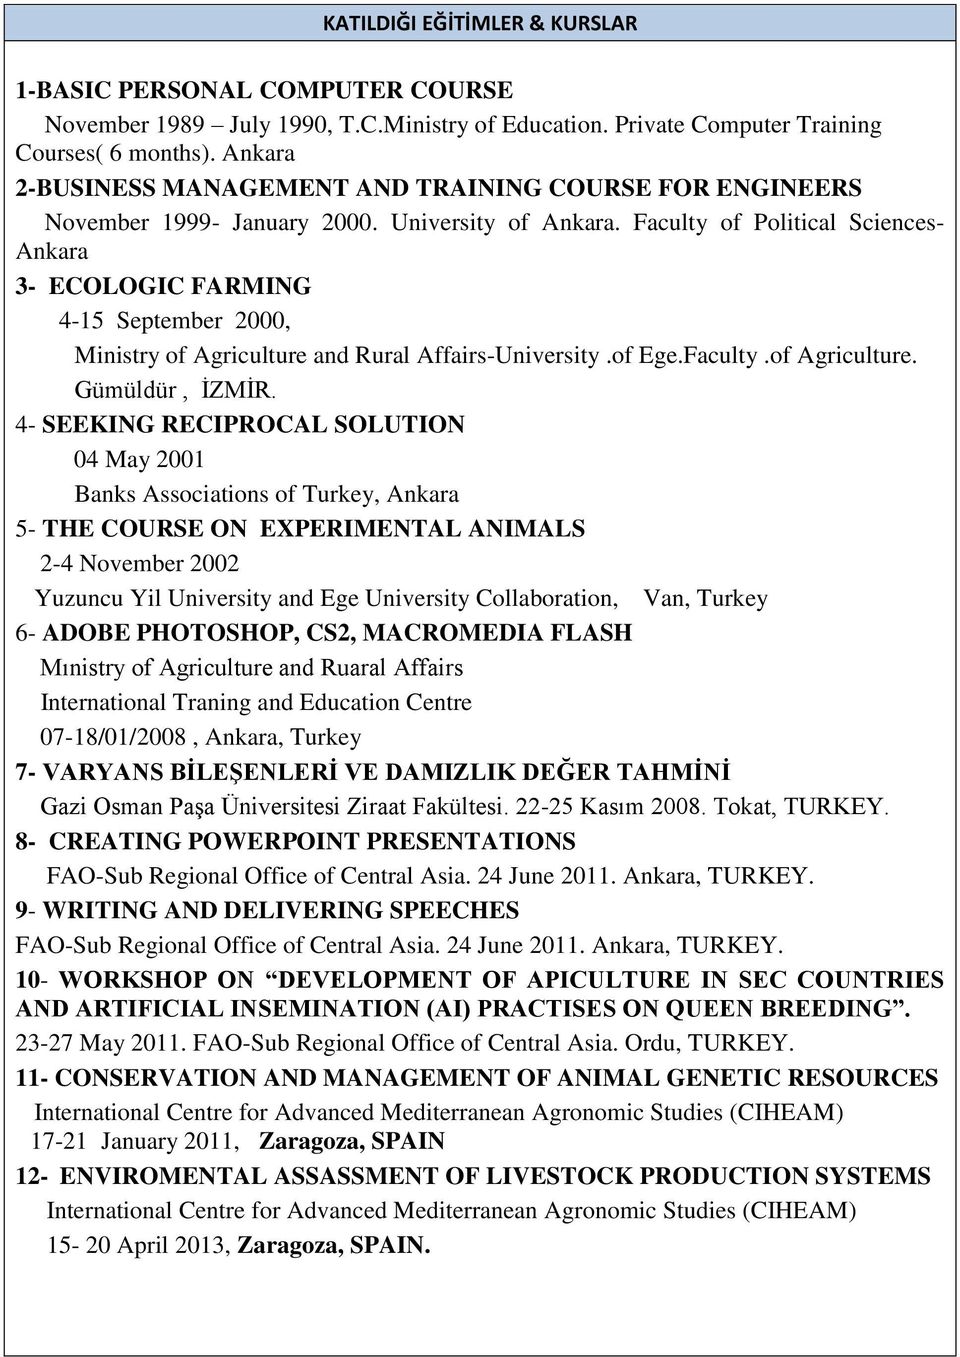 Faculty of Political Sciences- Ankara 3- ECOLOGIC FARMING 4-15 September 2000, Ministry of Agriculture and Rural Affairs-University.of Ege.Faculty.of Agriculture. Gümüldür, İZMİR.